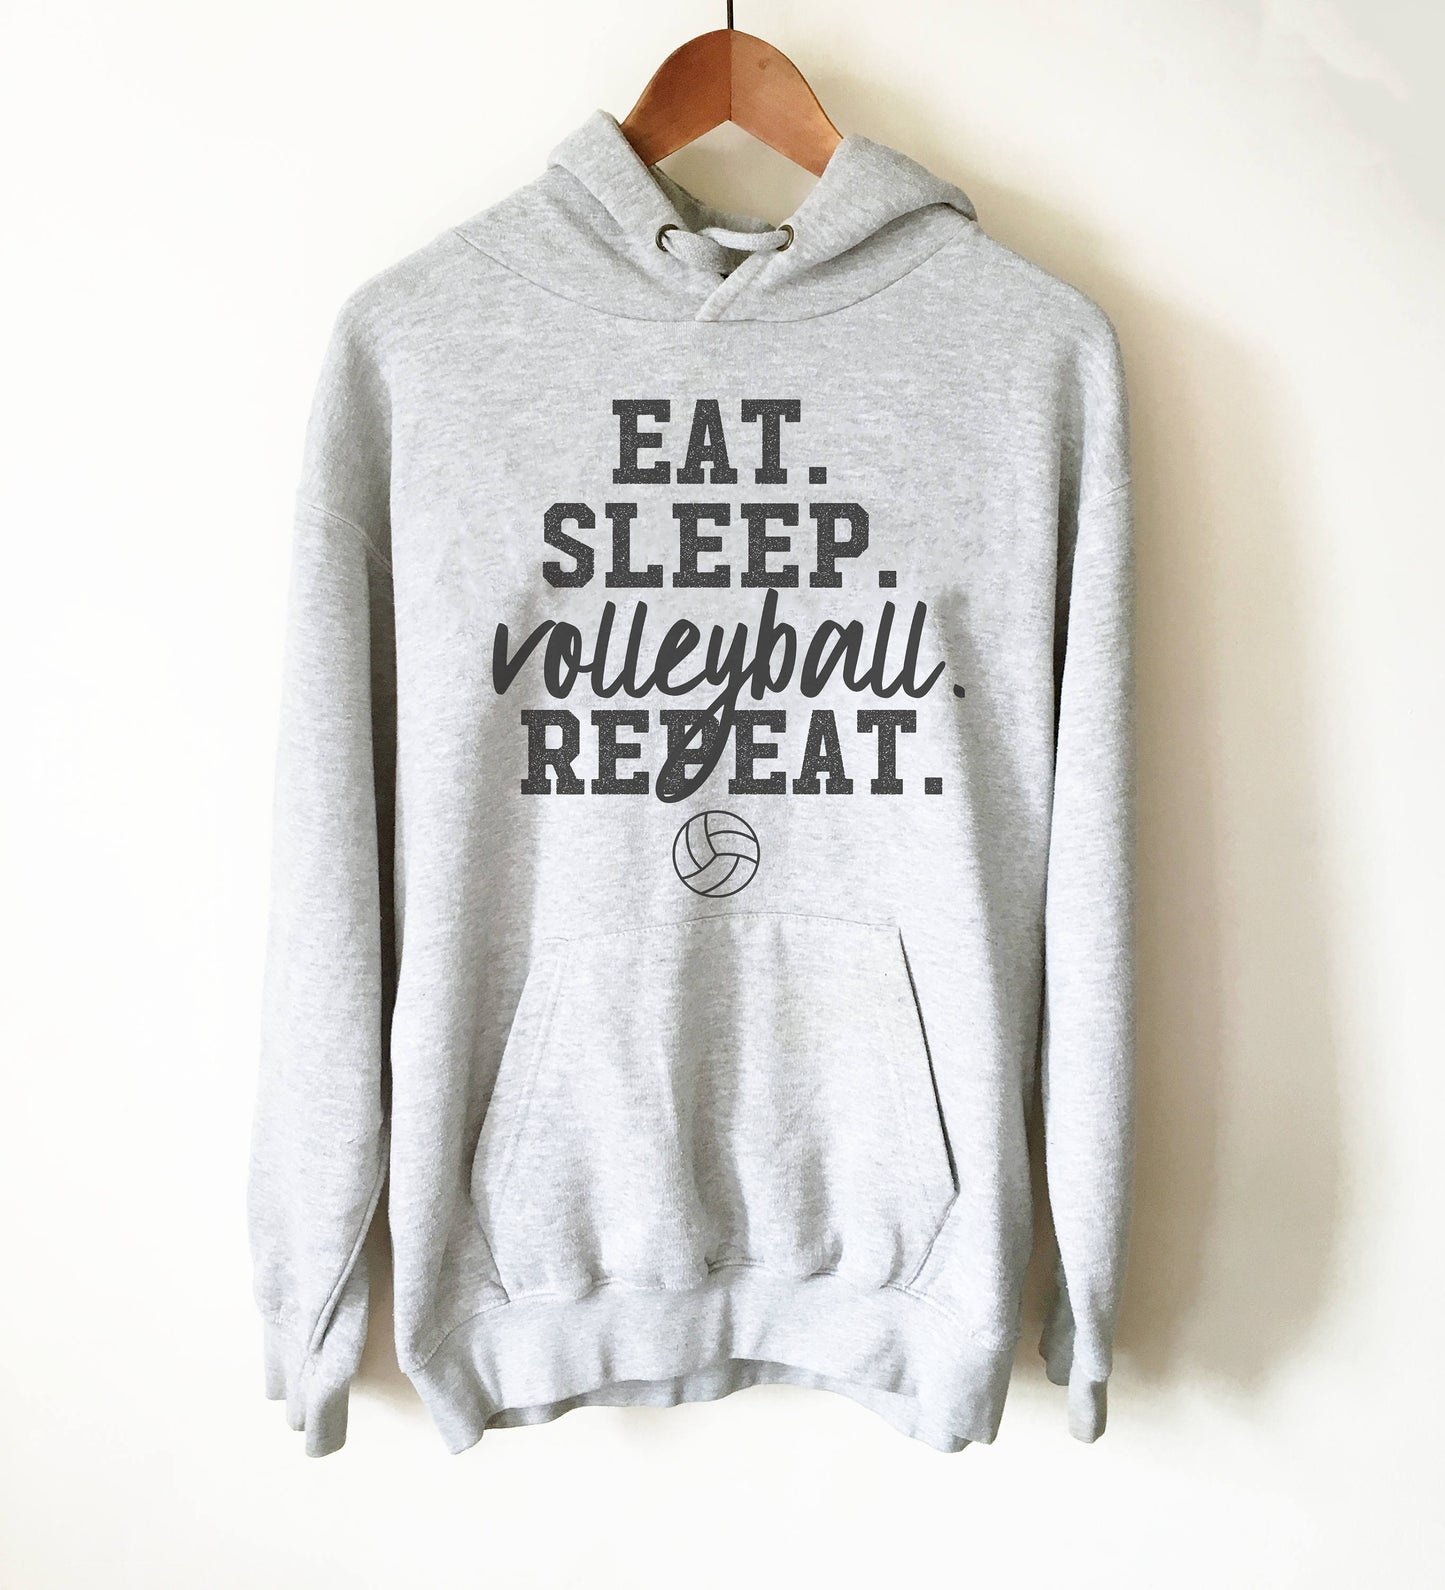 Eat Sleep Volleyball Repeat Hoodie - Volleyball Hoodie, Volleyball mom shirt, Volleyball gift, Volleyball team, Volleyball player